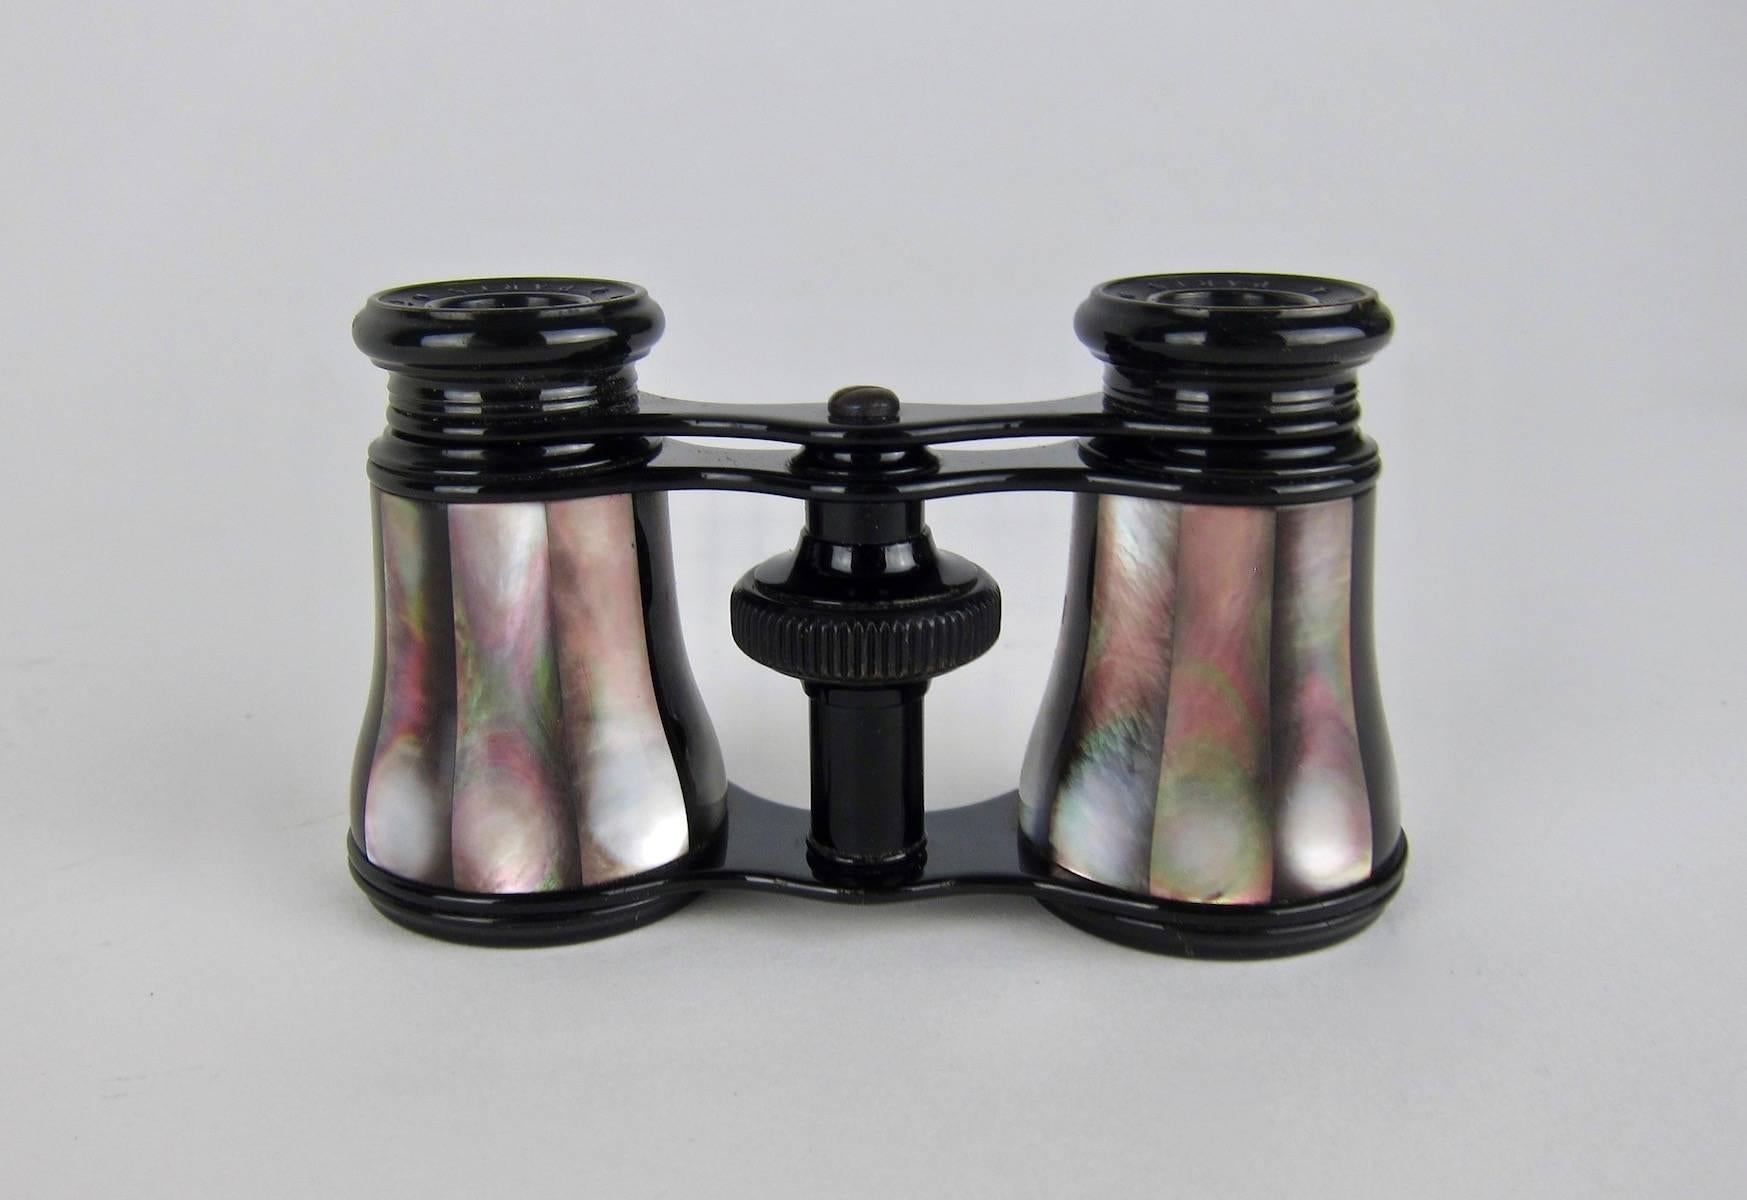 An elegant antique pair of French opera glasses or small binoculars with their original fitted leather case by LeMaire of Paris. The telescoping glasses have a black metal frame and the barrels are ornamented with dark iridescent abalone /